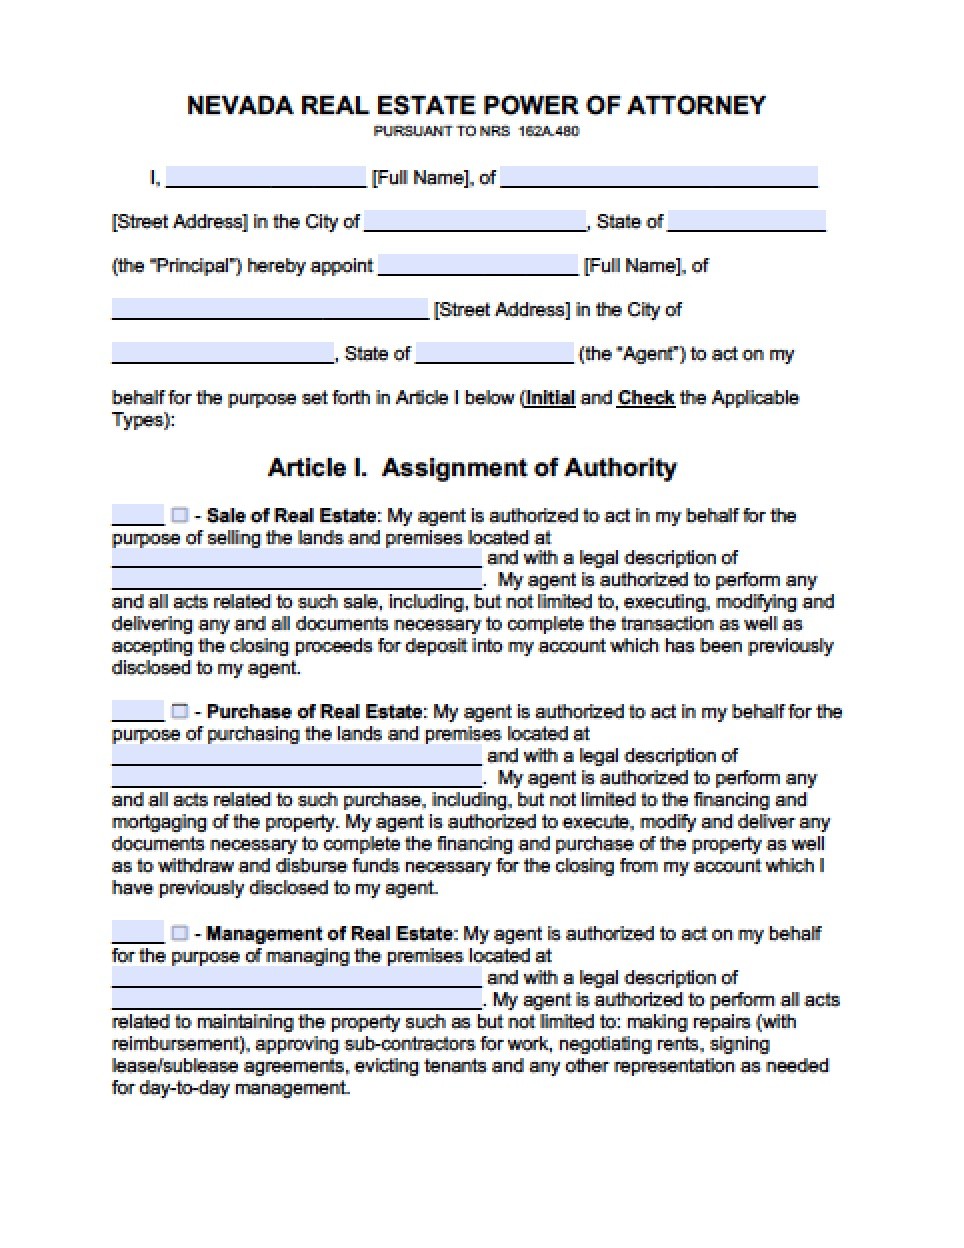 Nevada Medical Power Of Attorney Form Document